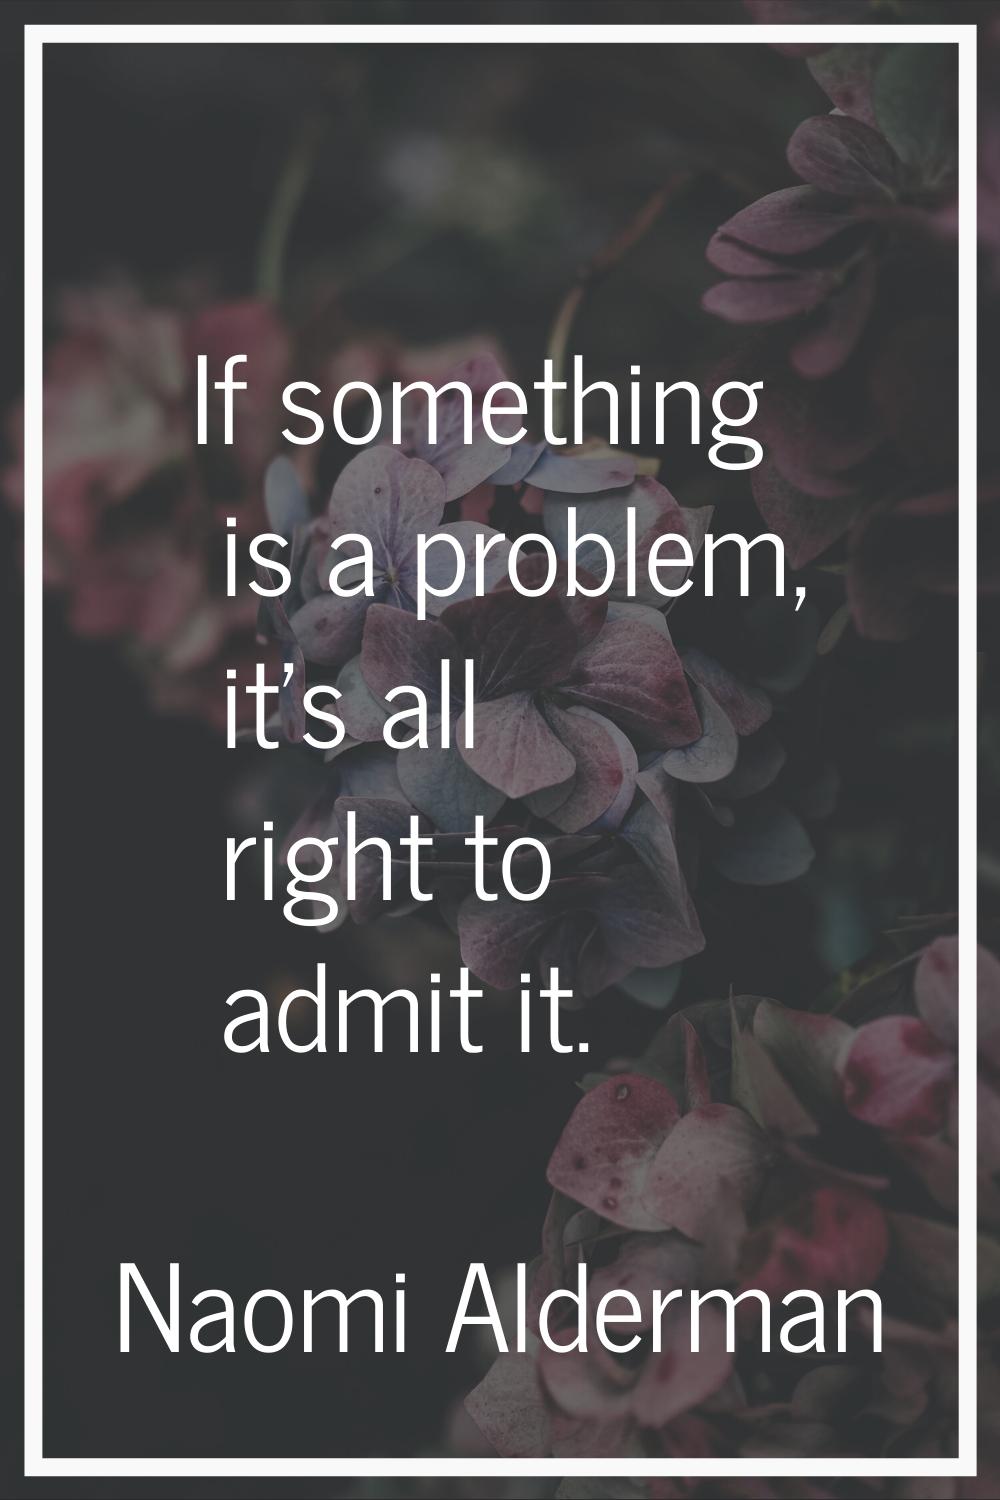 If something is a problem, it's all right to admit it.